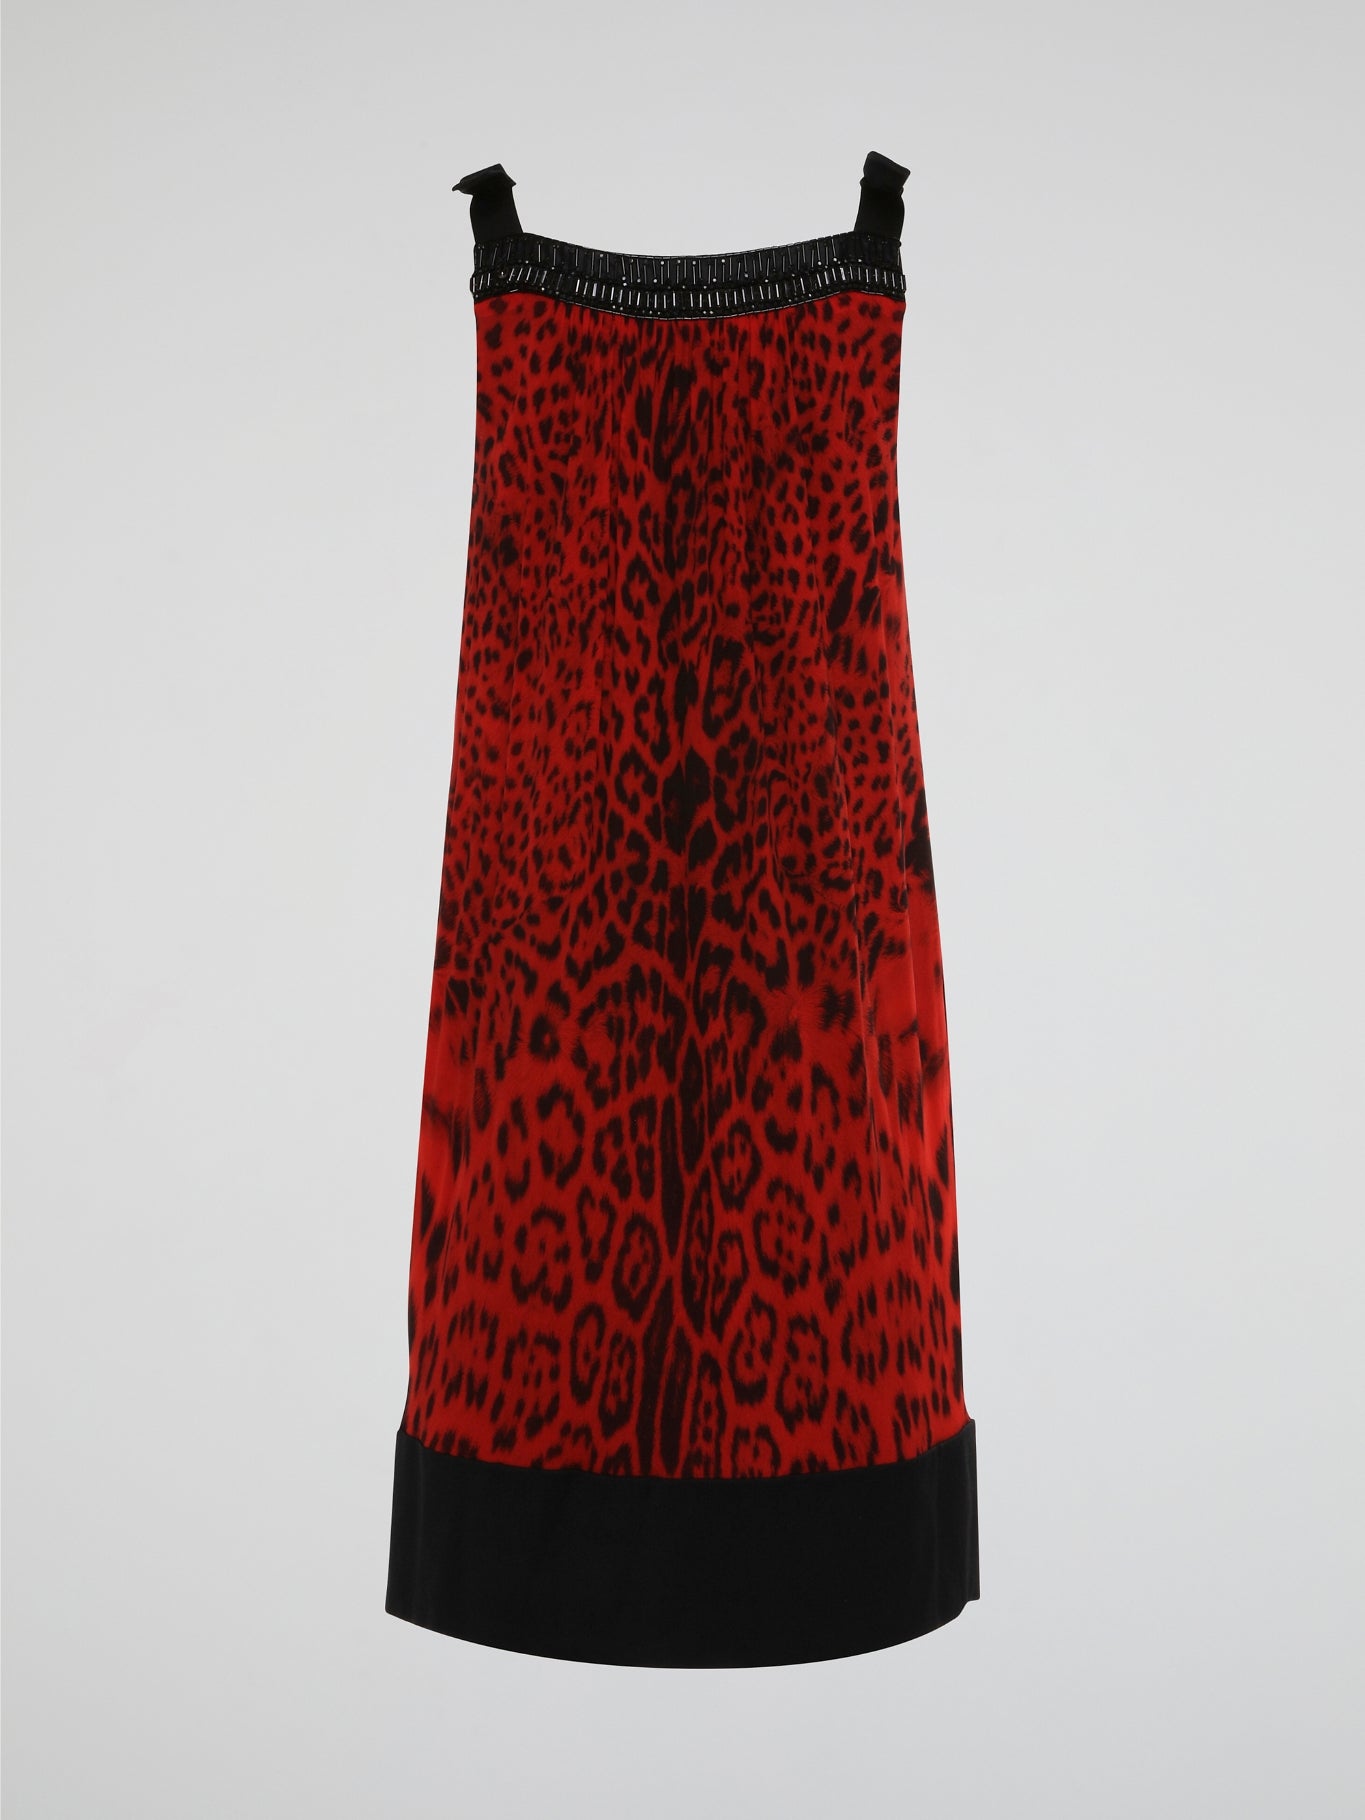 Step into the wild side with this fierce Red Leopard Print Shift Dress by Roberto Cavalli. Crafted from luxurious fabric, this dress is a statement piece perfect for any glamorous occasion. Embrace your inner fashionista and unleash your bold, confident style with this striking and stunning design.